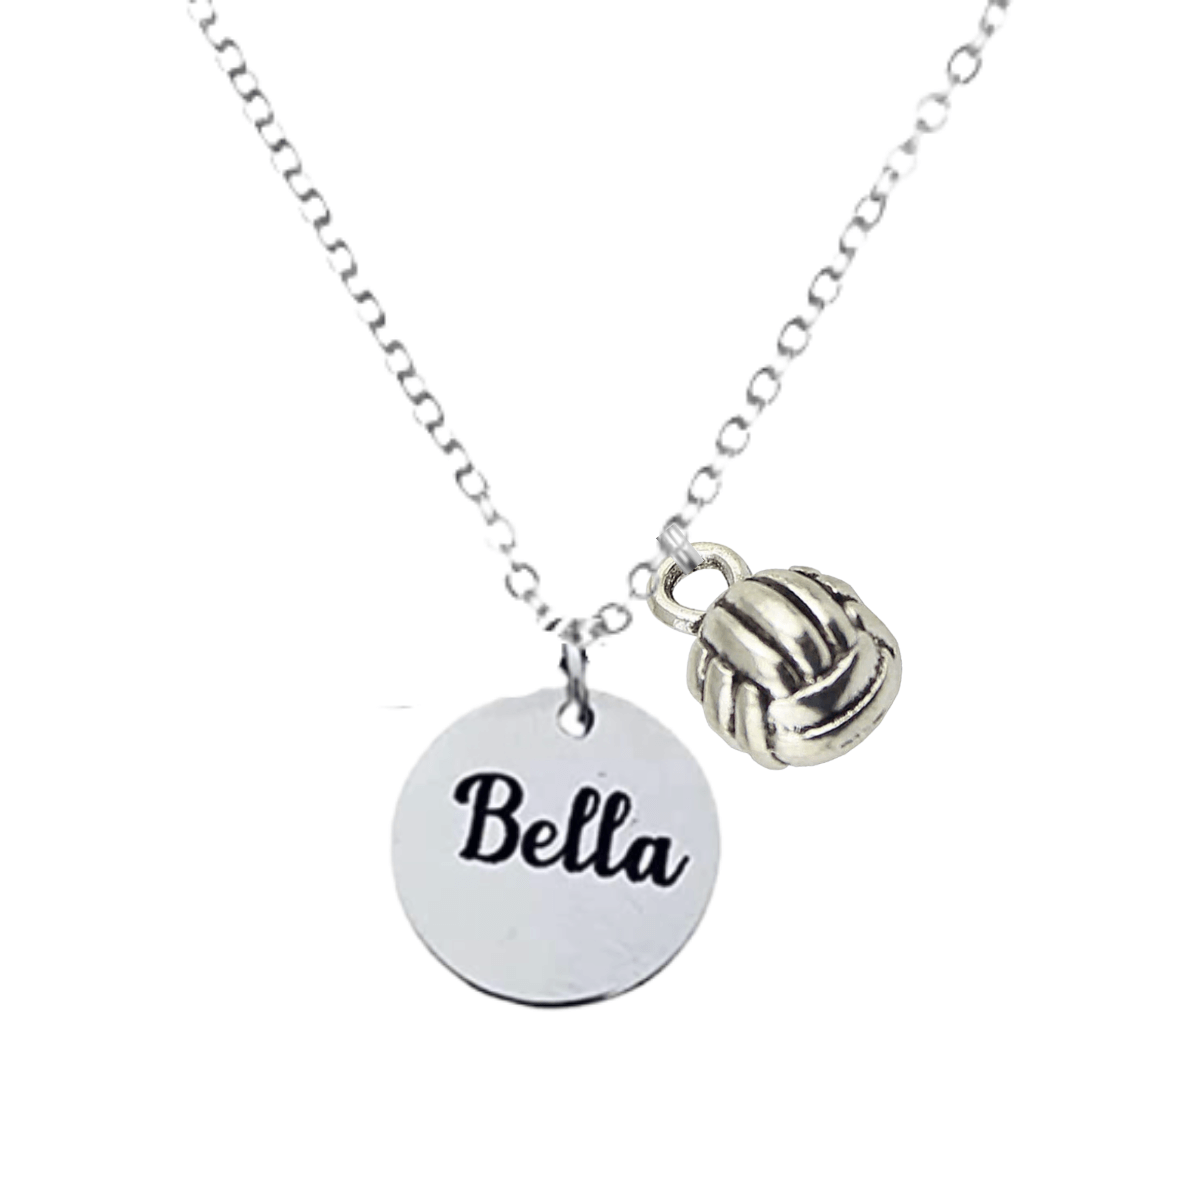 Engraved Volleyball Necklace with Volleyball Ball Charm